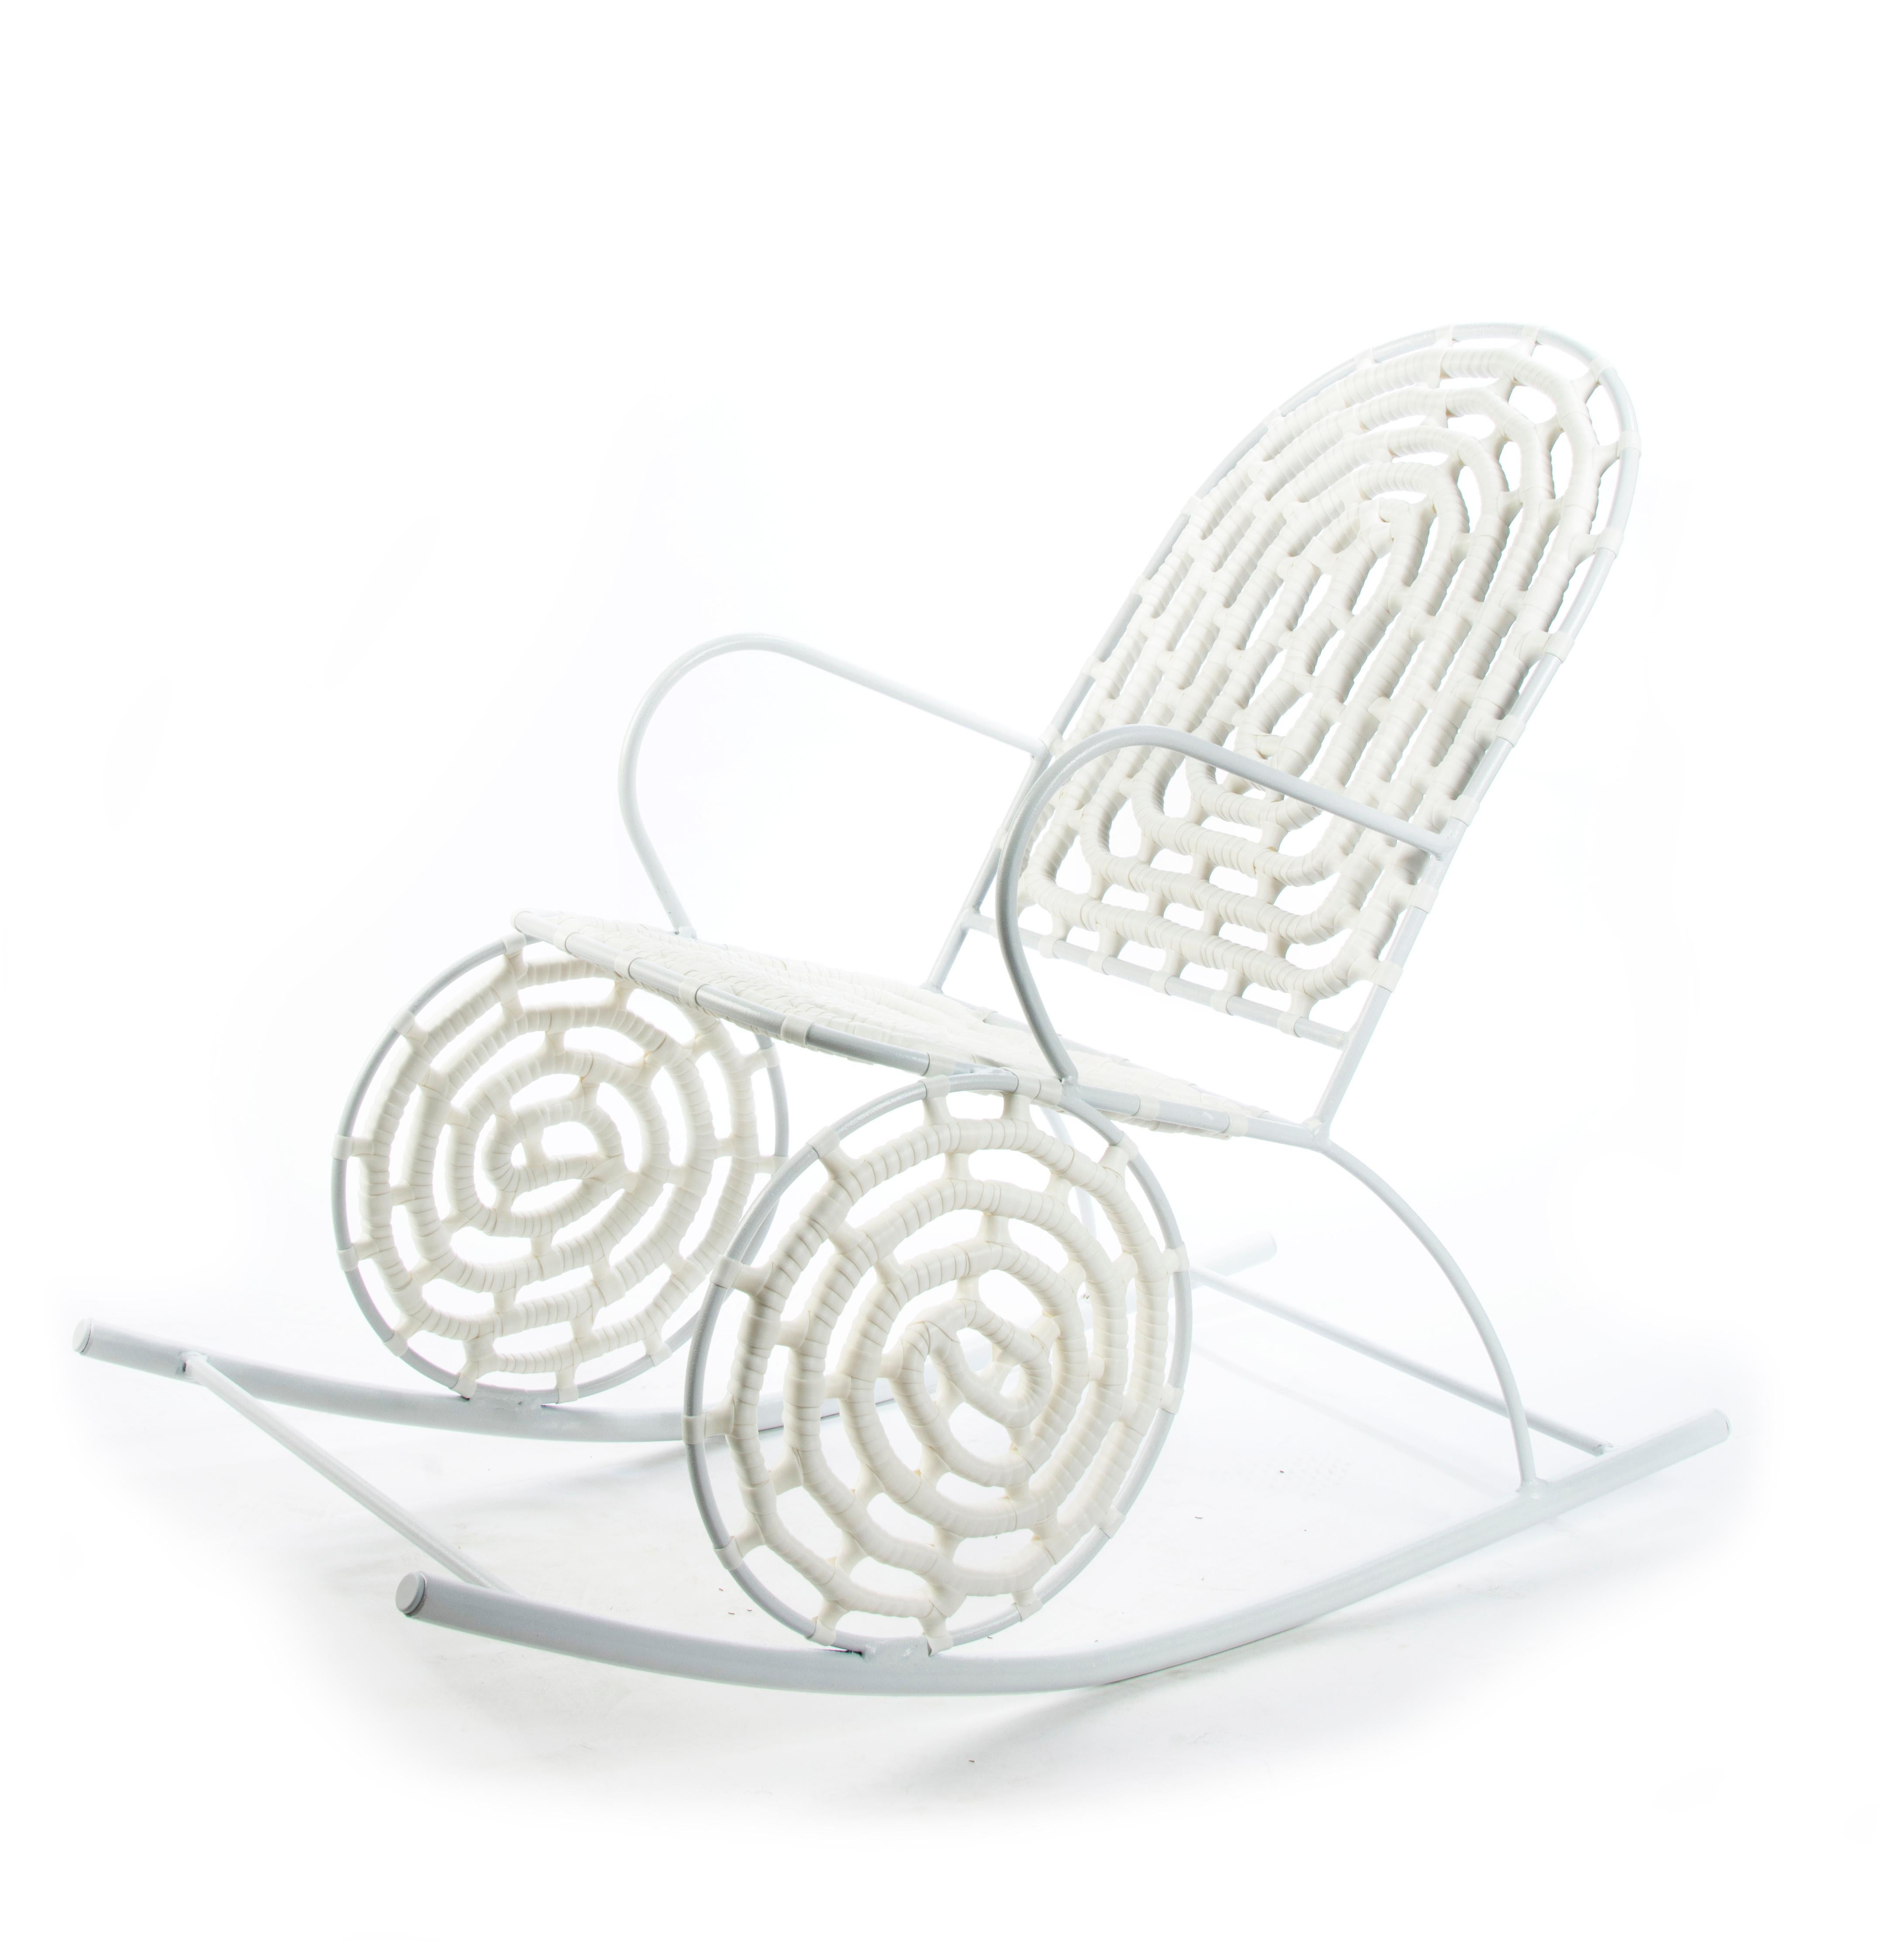 Modern Rock-a-bye Baby Chair, 1 of 1 by Nawaaz Saldulker For Sale